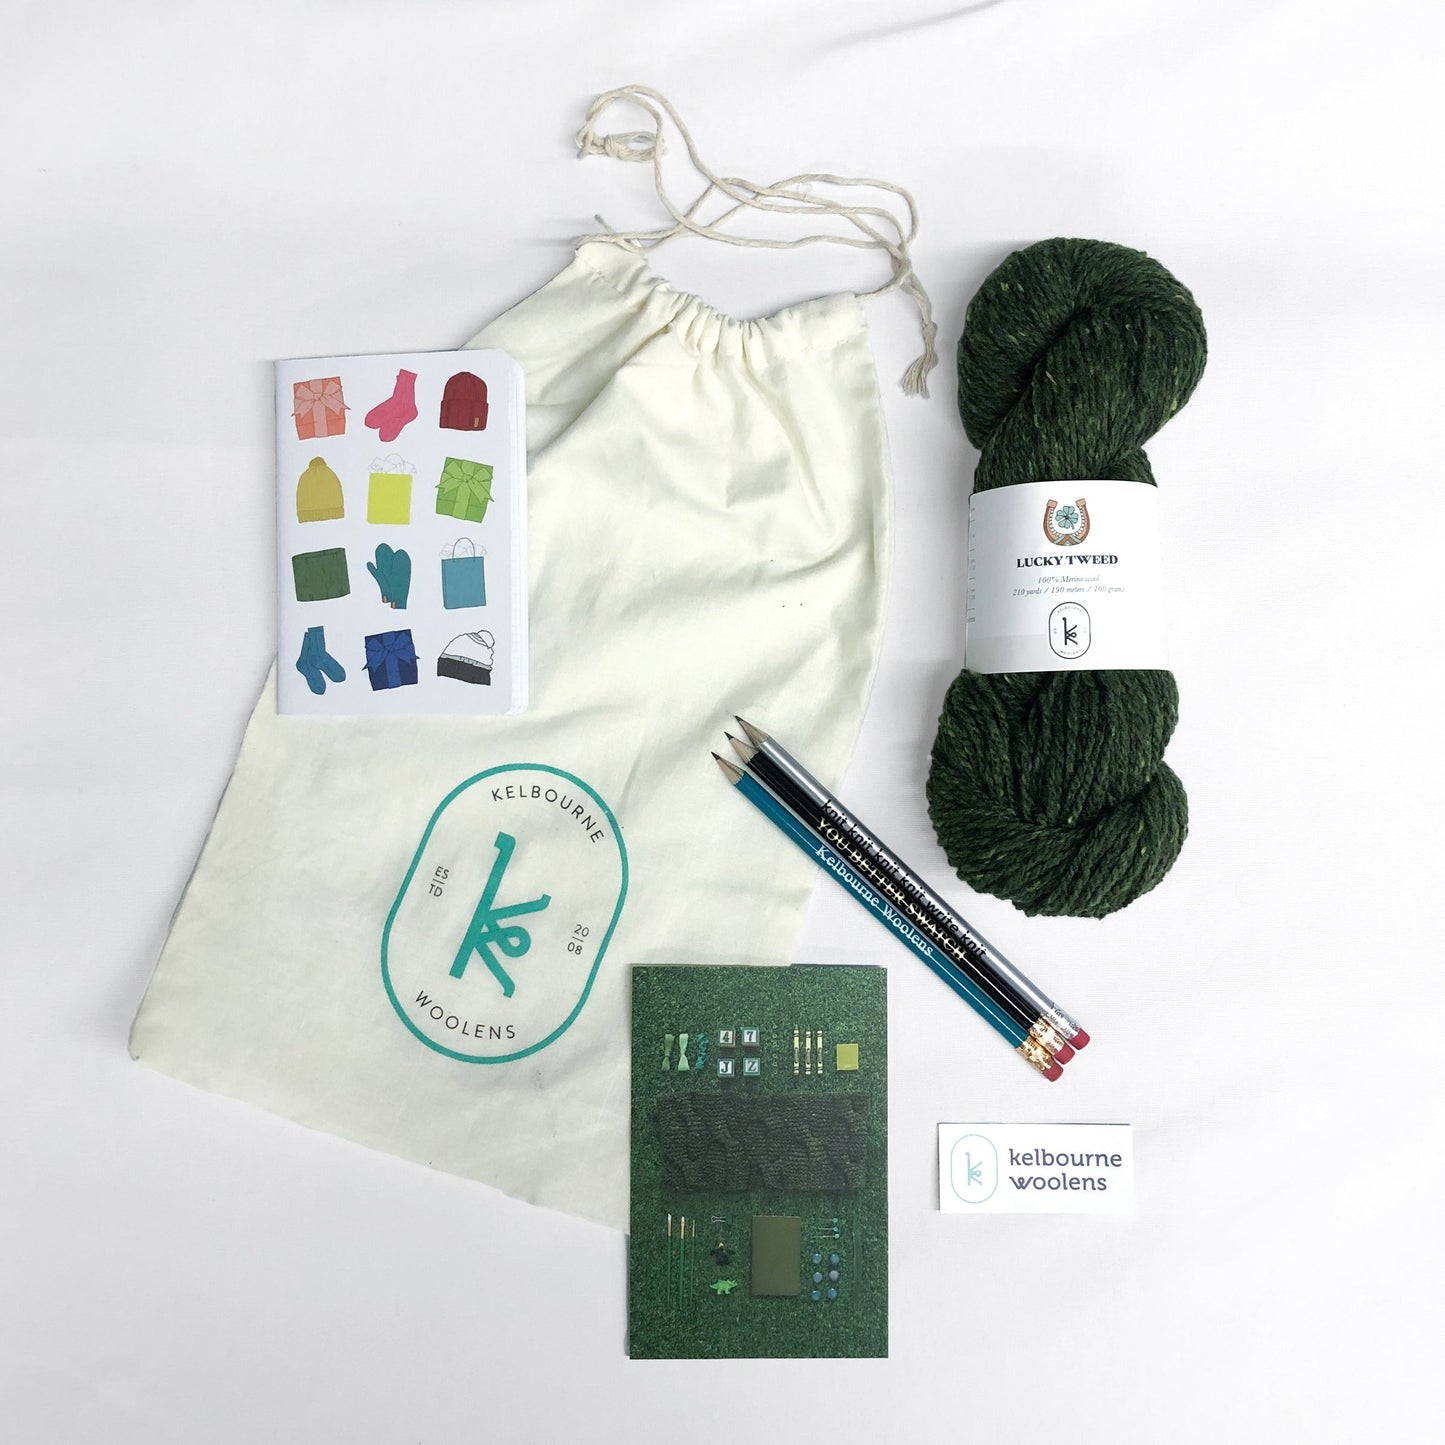 Kelbourne Woolens Kits Year of Gifts Kit - March Shamrock Cowl